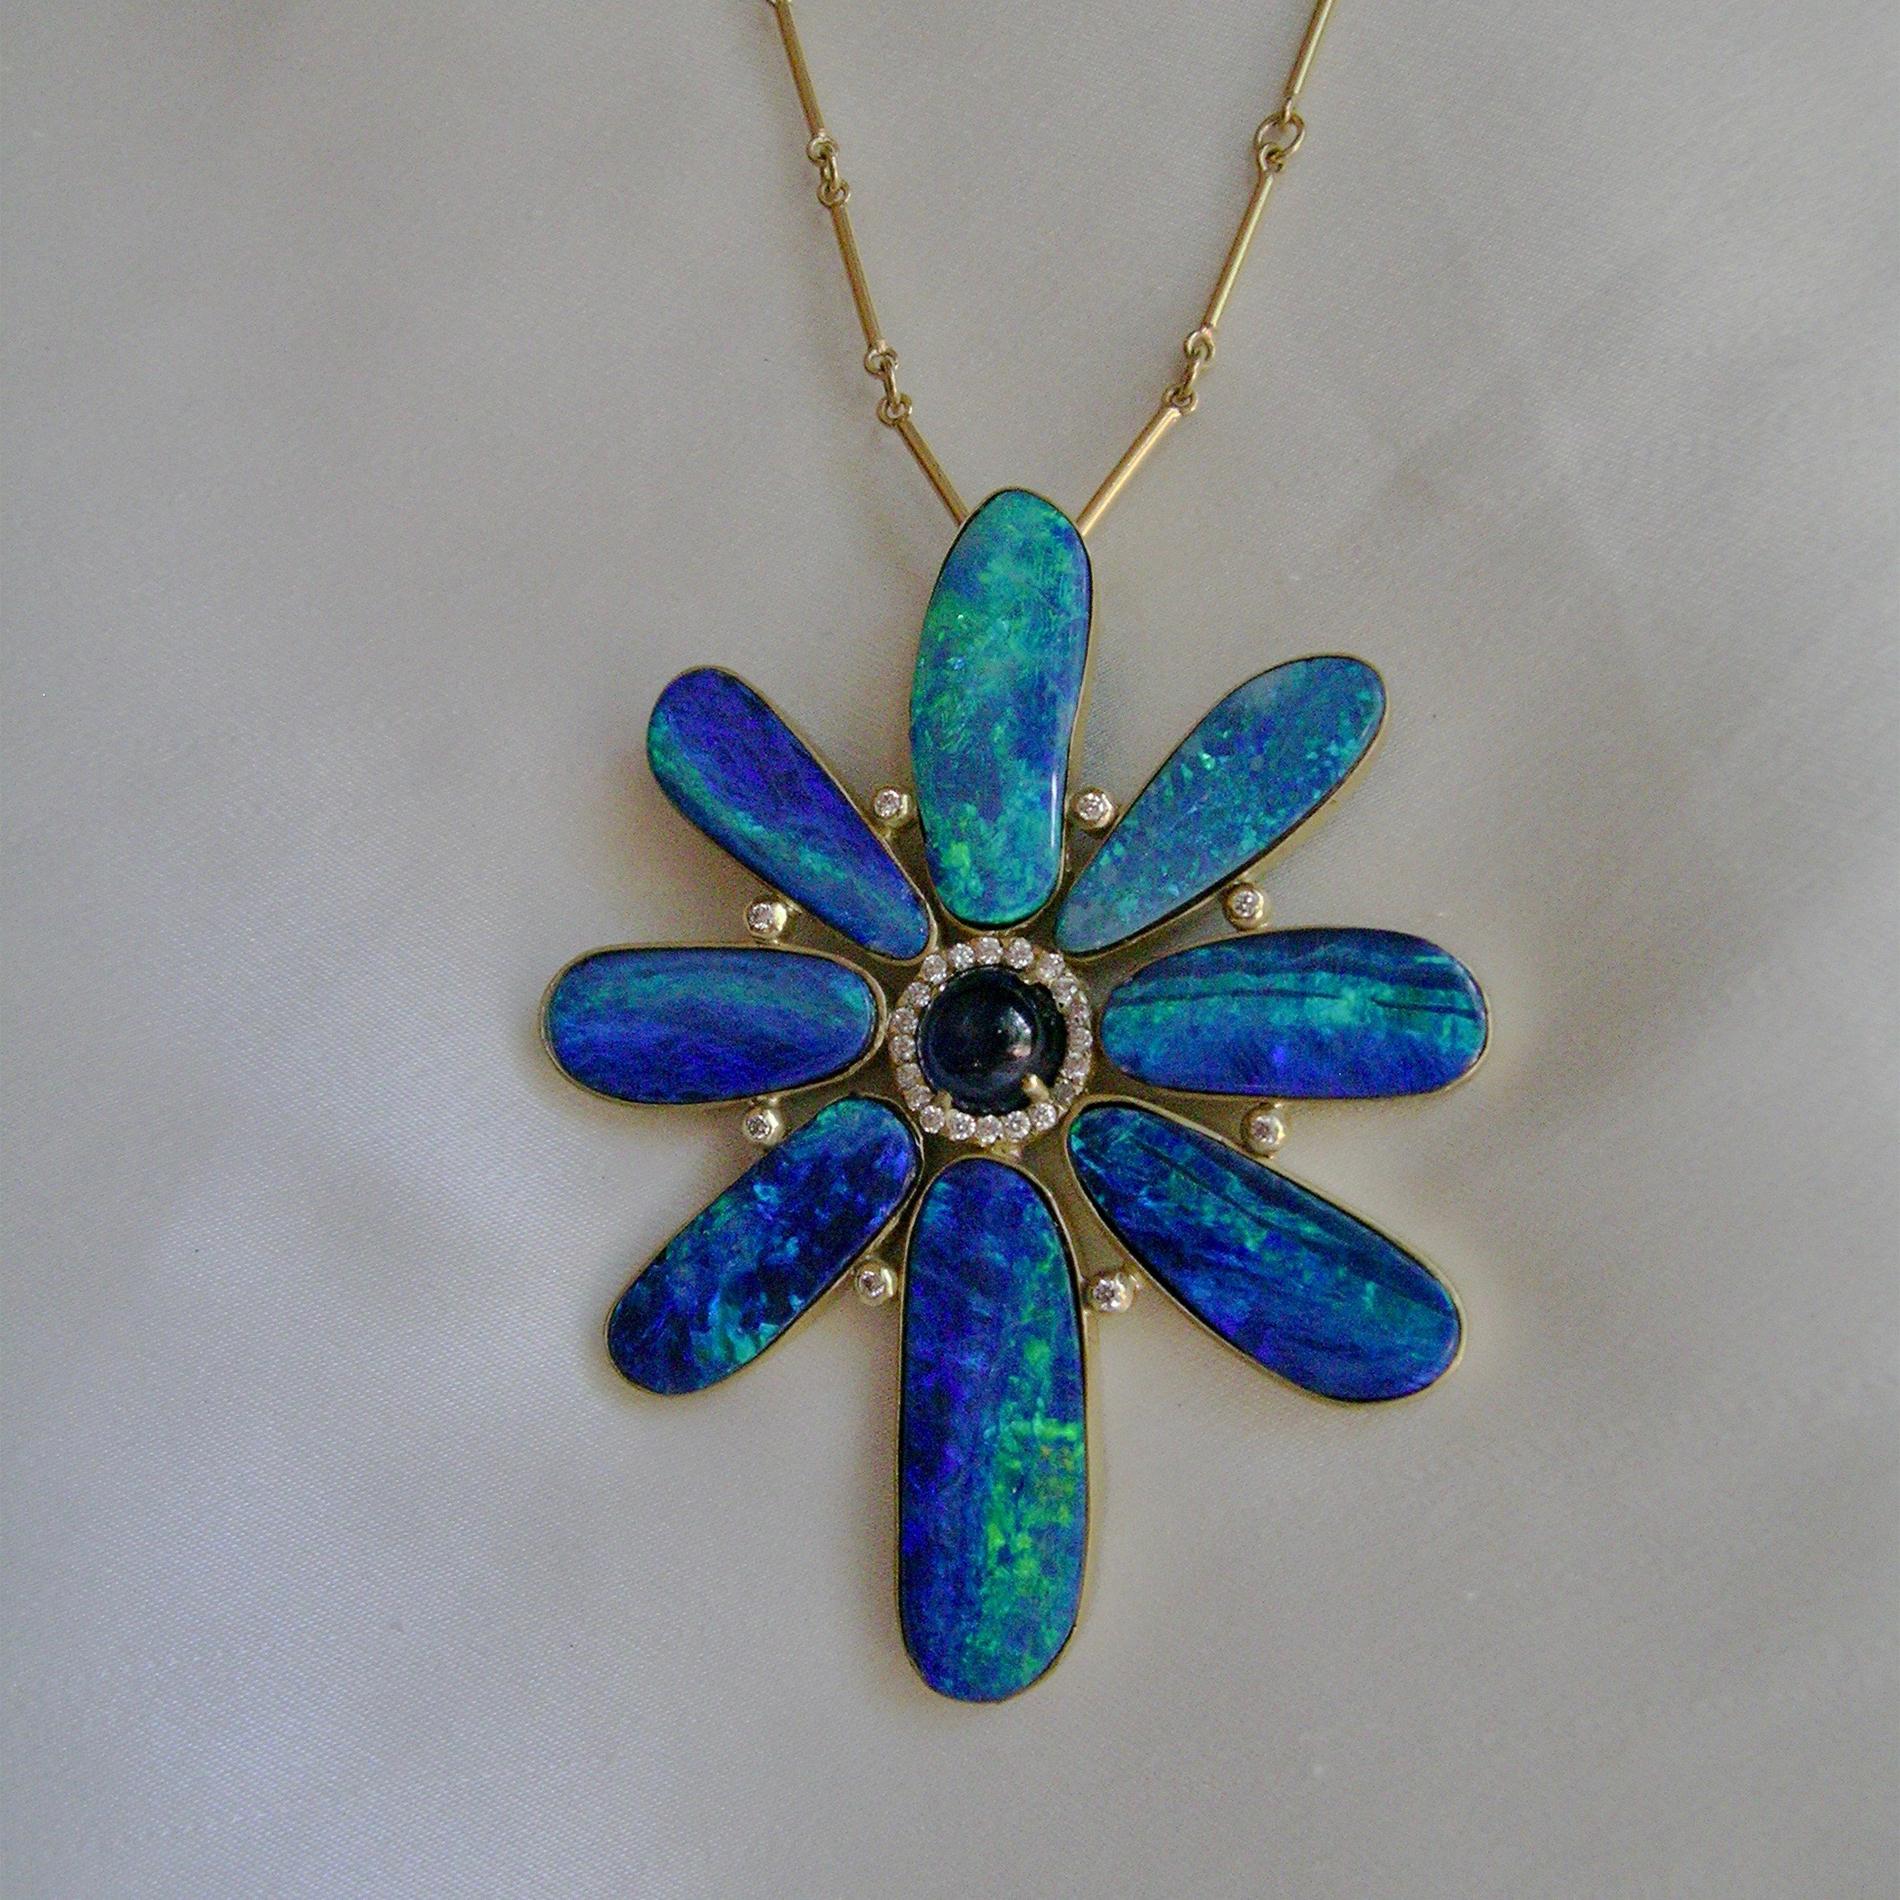 This is a dramatic piece and makes a bold, colorful statement.  If you love flower pendants, but they often are too small for your frame, here is something for you.  11.5 cts of Boulder Opals from Australia create the unique flower shape, with a